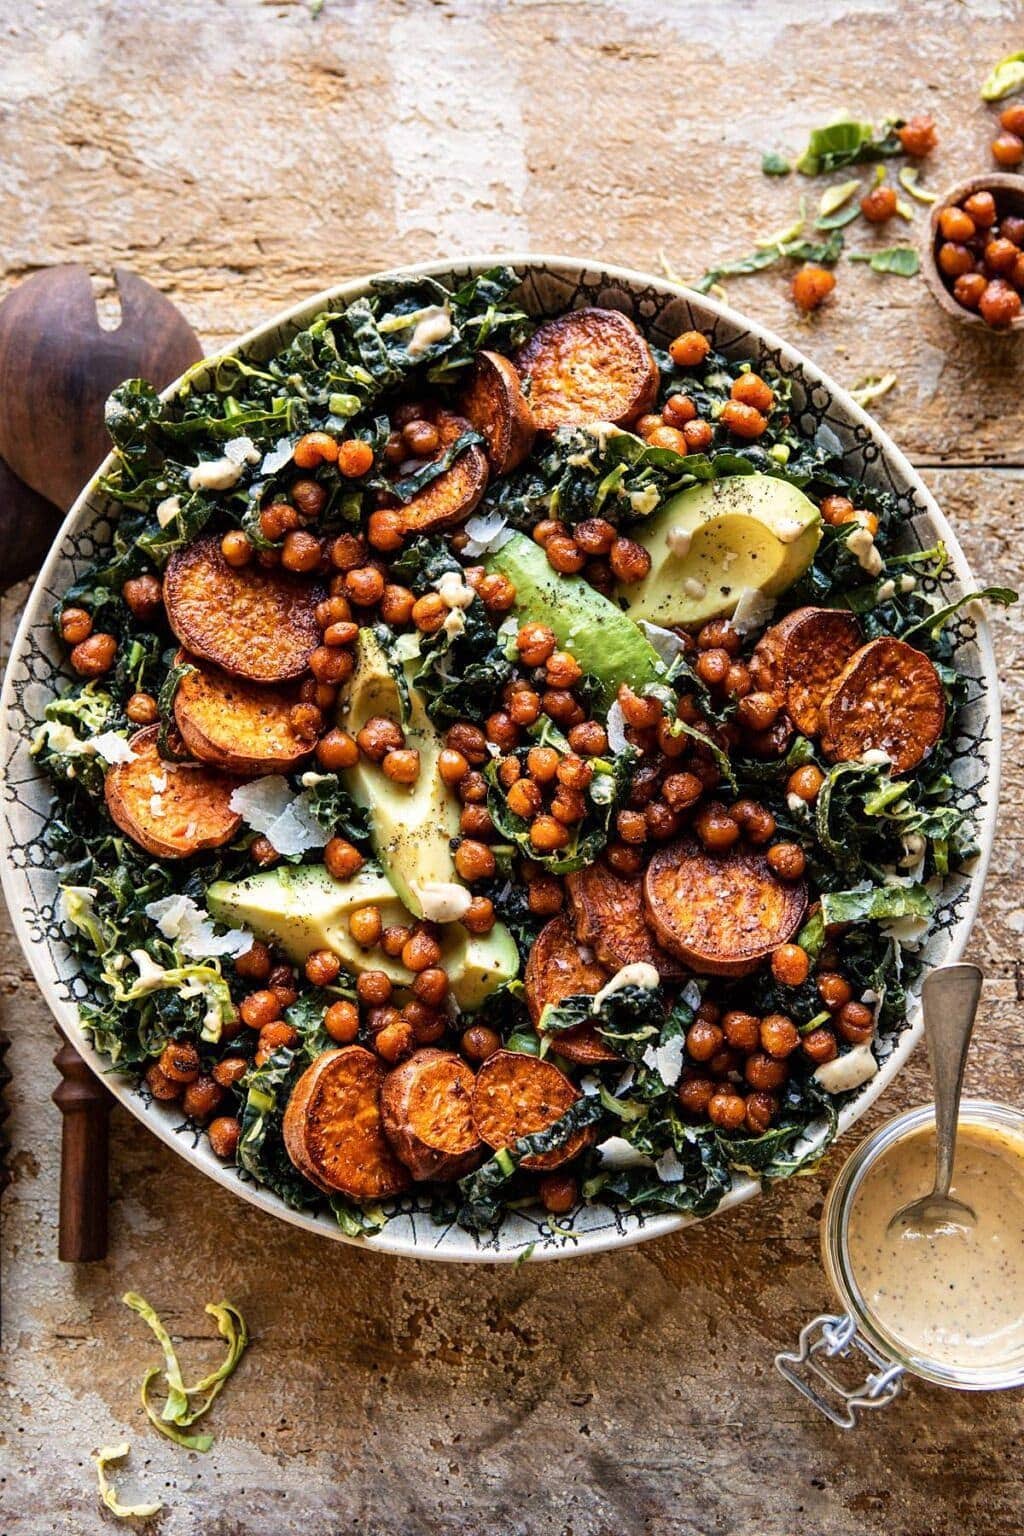 Kale Caesar Salad with sweet potatoes, crispy chickpeas, shredded brussels sprouts, and avocado served on a plate with a glass of lemony parmesan tahini dressing on the side